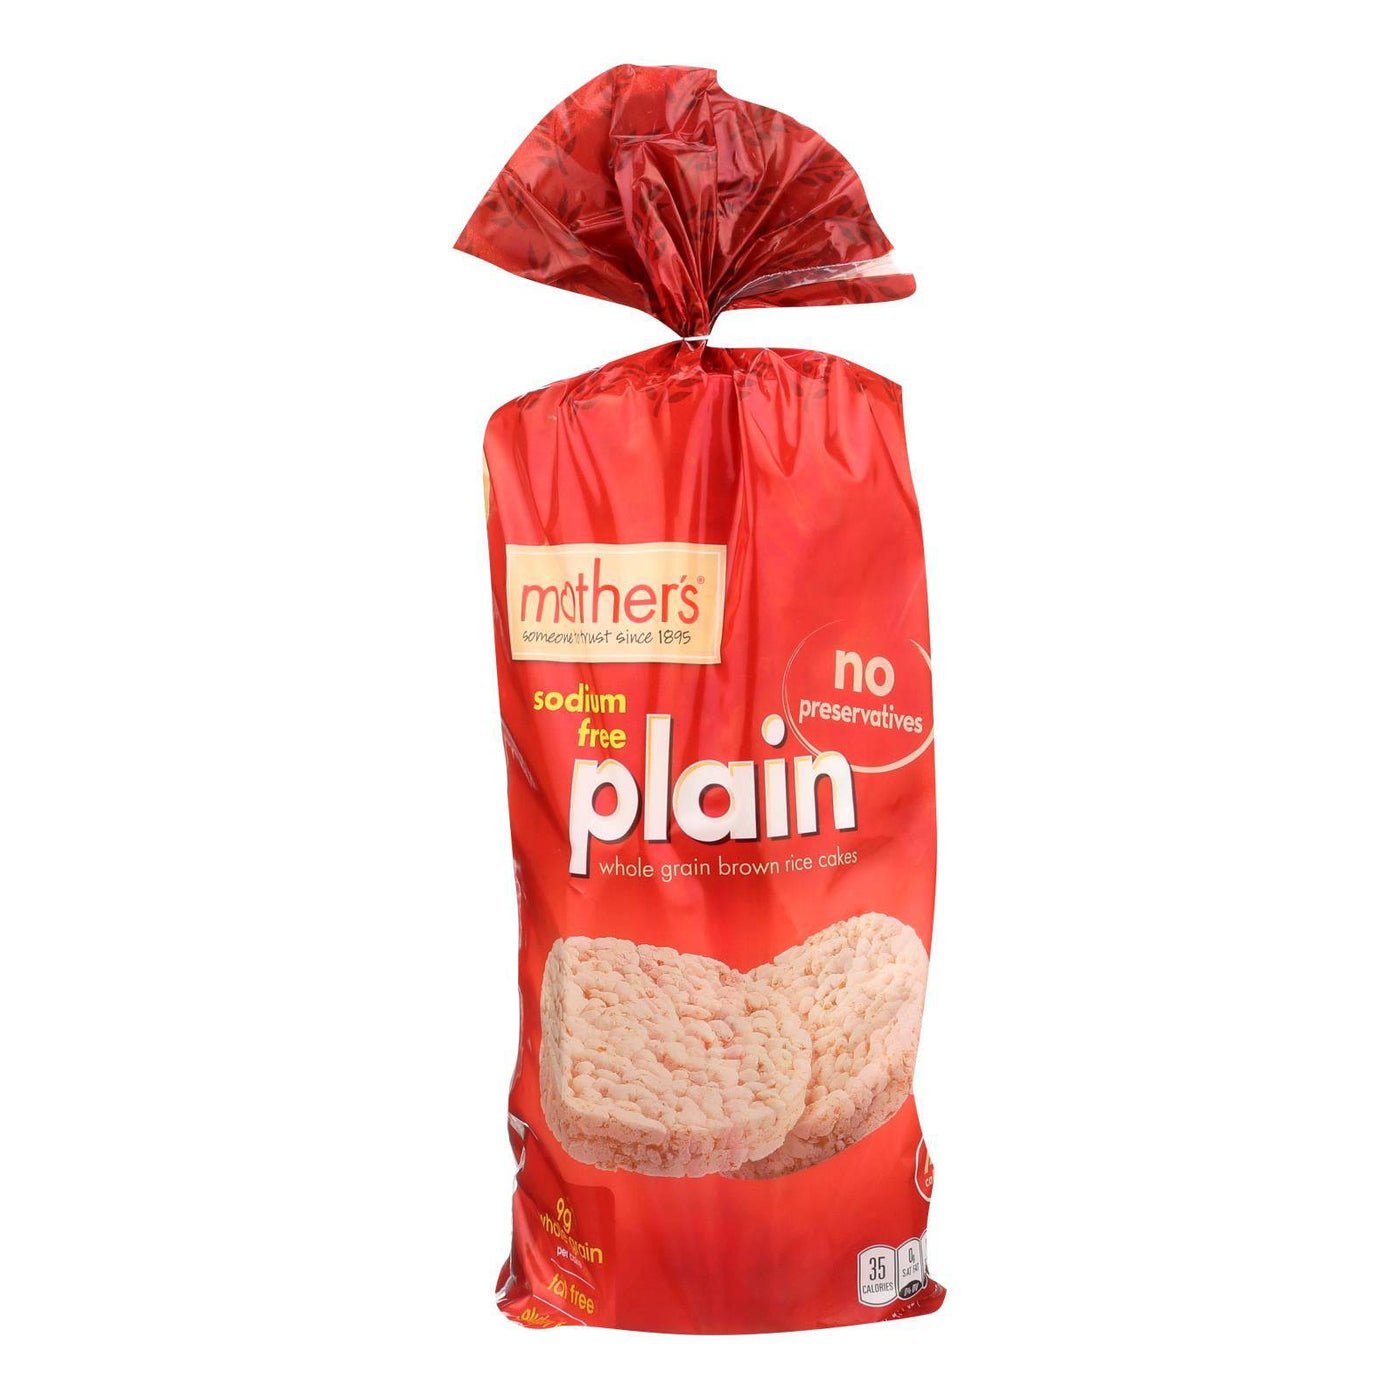 Buy Mother's Plain Rice Cakes - Rice - Case Of 12 - 4.5 Oz.  at OnlyNaturals.us